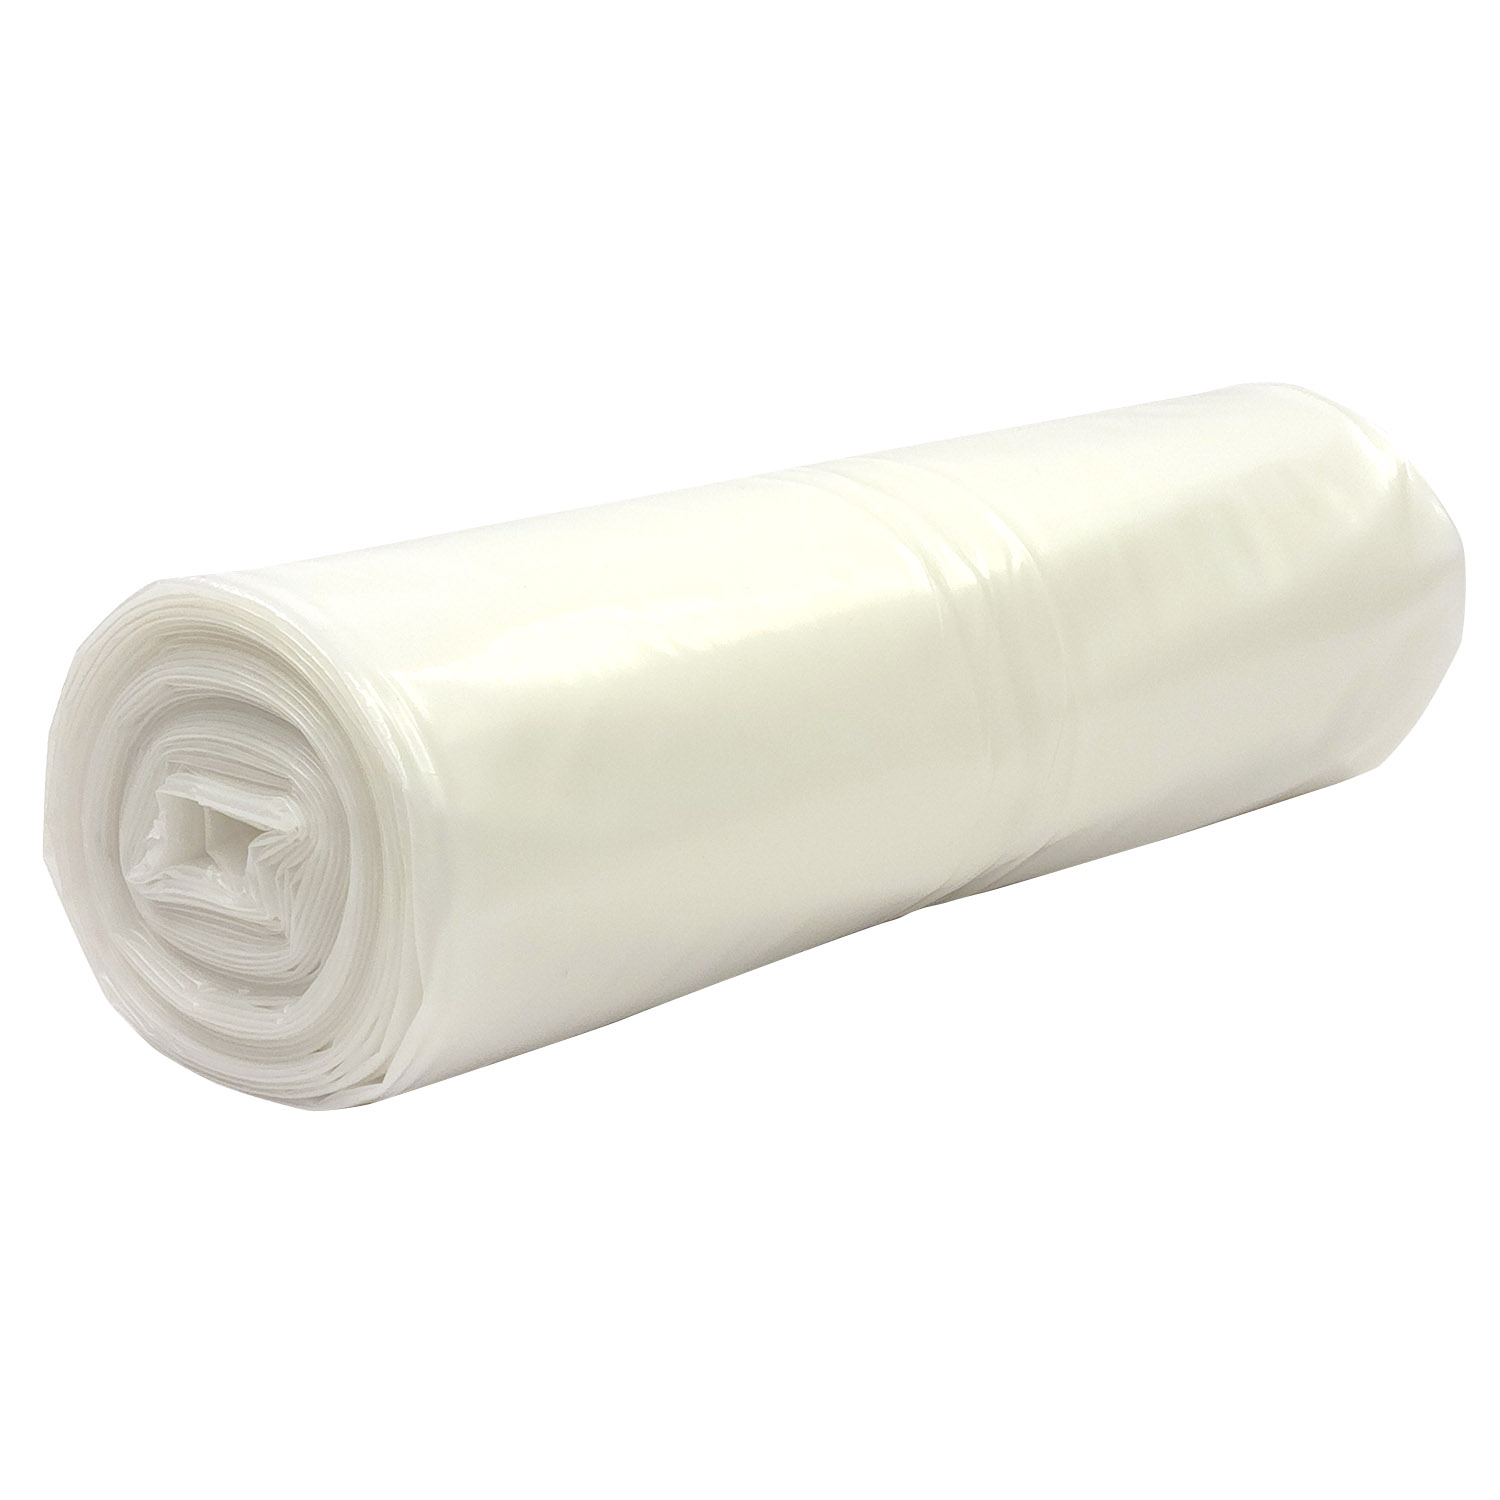 Husky 6 Mil Heavy Duty Clear Plastic Sheeting - image 5 of 6